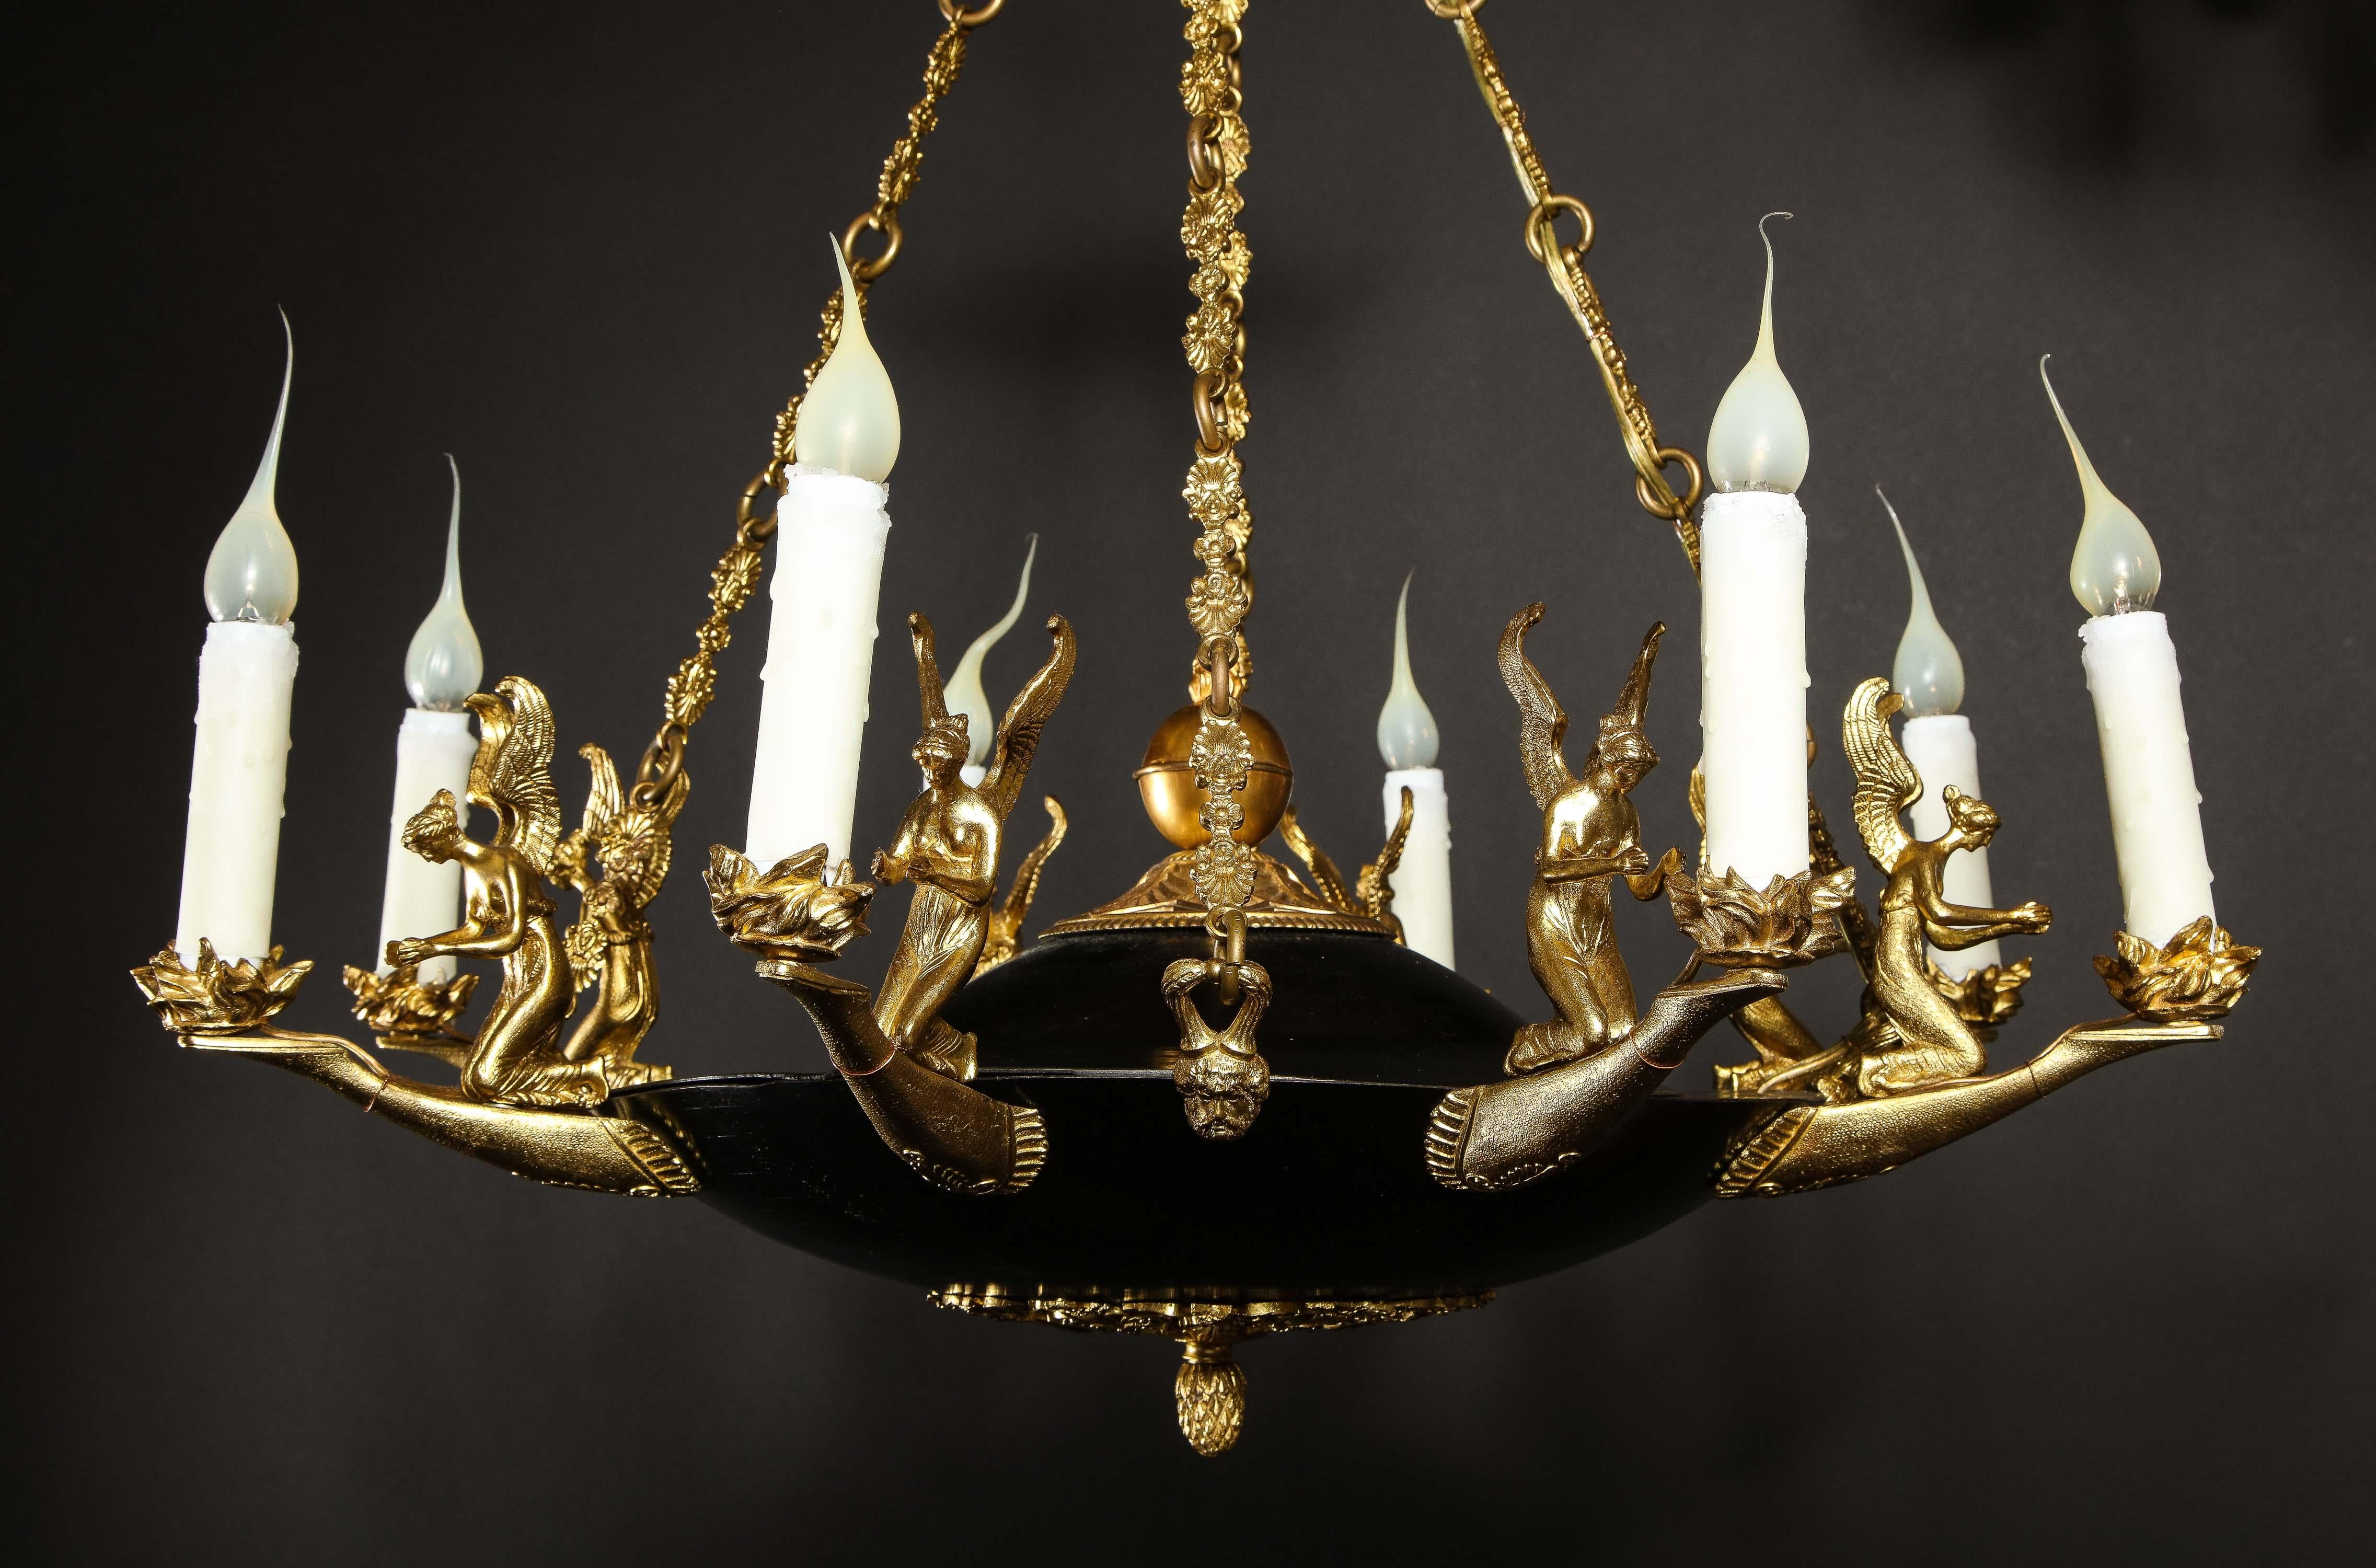 Pair of Antique French Empire Style Figural Gilt & Patina Bronze Chandeliers For Sale 1